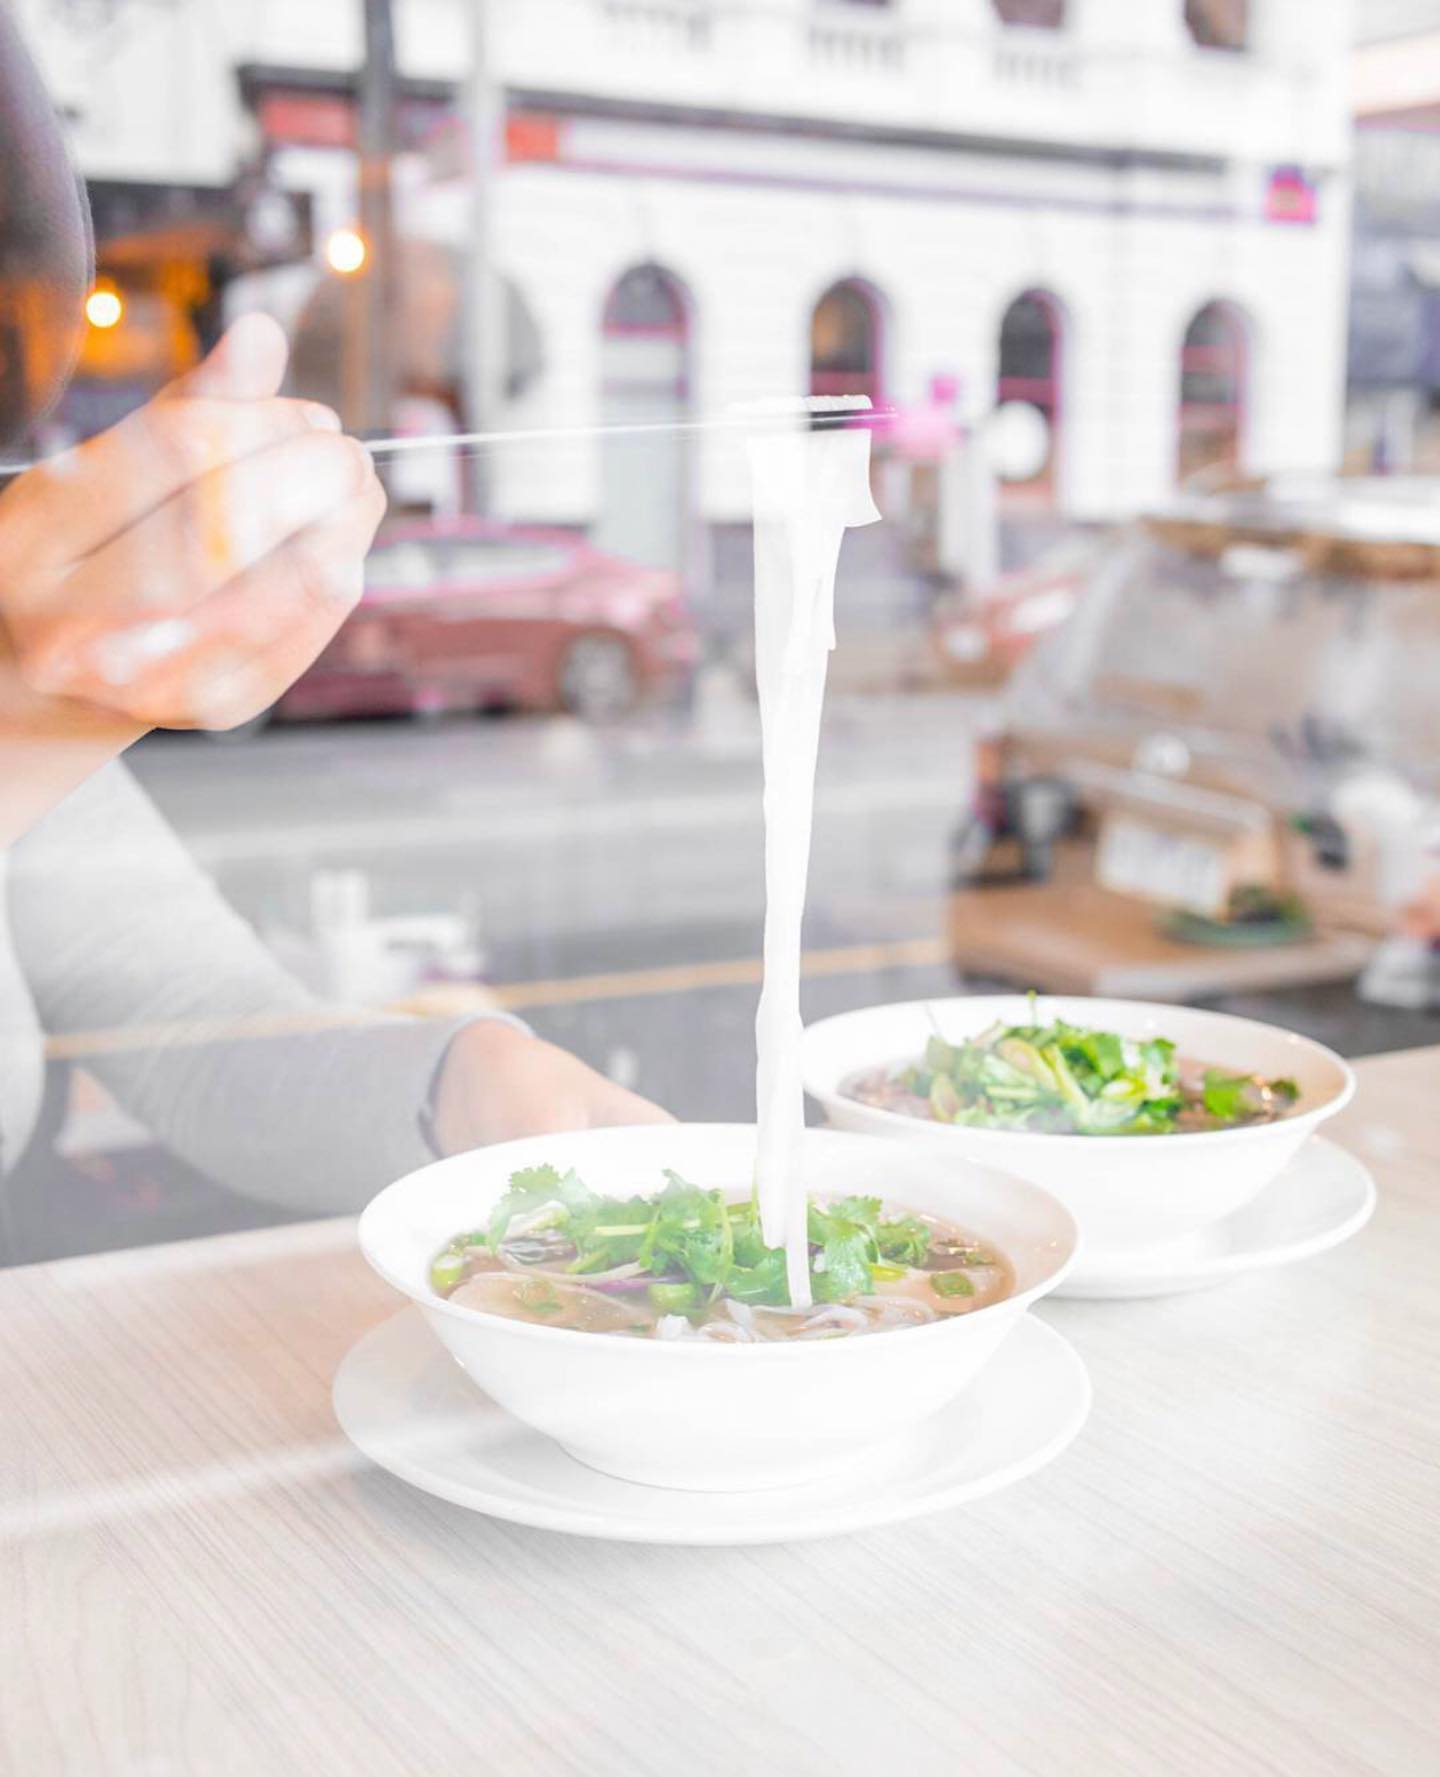 It’s pho season. Keep yourself warm with one of our Vietnamese noodle soup bowls. We are open today from 11:30am until 9:30pm. 😉 We are looking forward to serve our pho addict their favourite noodle soups. ☺️

#winterfood #vietnamesefood #vietnamesecuisine #vietnamesenoodlesoup #pho #phoaddict #vegan #meatlover #glutenfree #restaurantmelbourne #brunswick #sydneyroad #melbournefoodie #findmeglutenfree